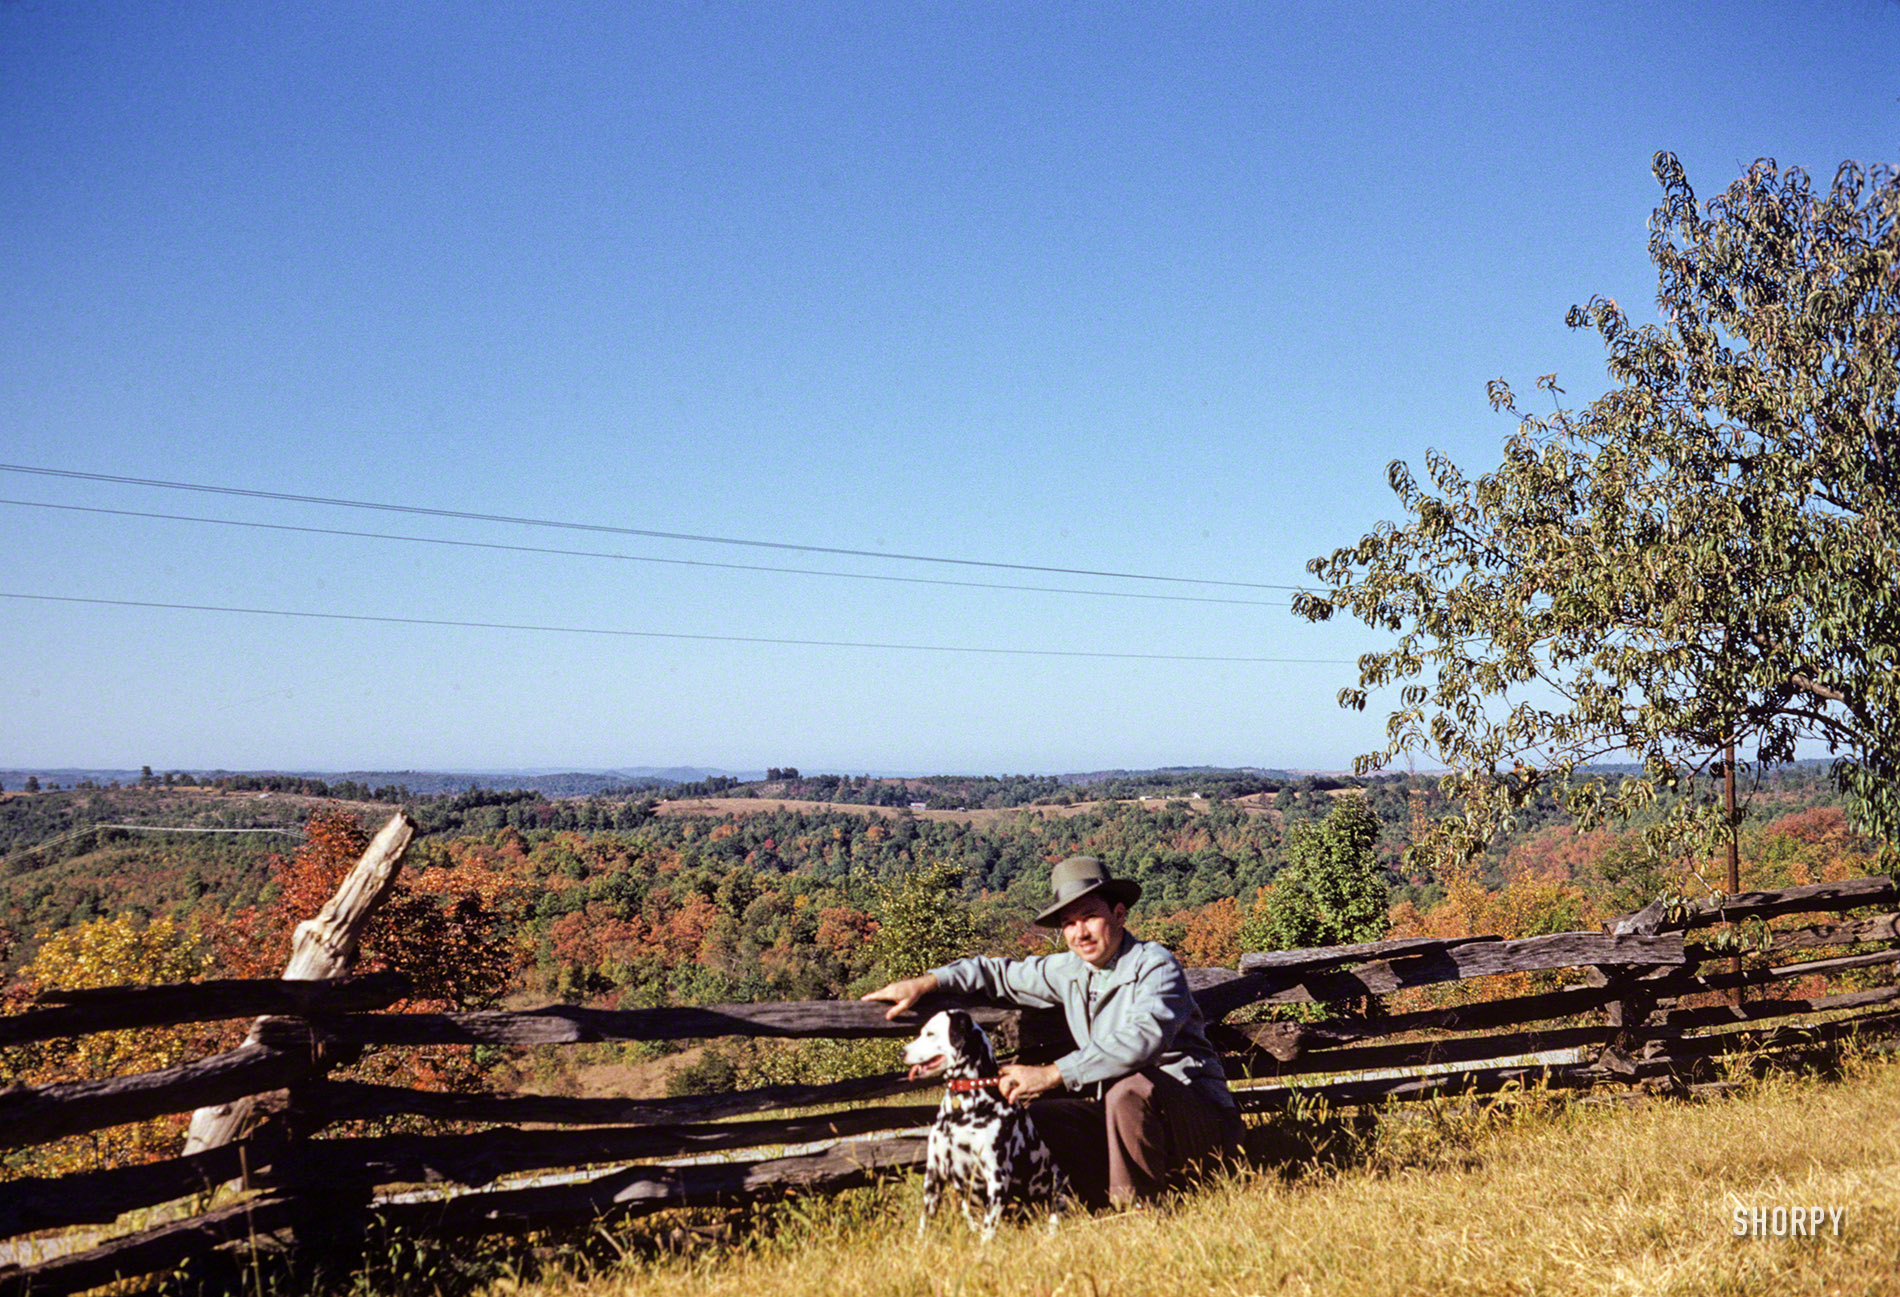 "7 October 1952 -- At Old Matt's Cabin." Hubert and Sally at the Shepherd of the Hills homestead, a farm in the Ozarks made famous by Harold Bell Wright's 1907 book, and the start of Branson, Missouri's transformation into a tourist destination. Kodachrome slide by Grace Tuttle. View full size.